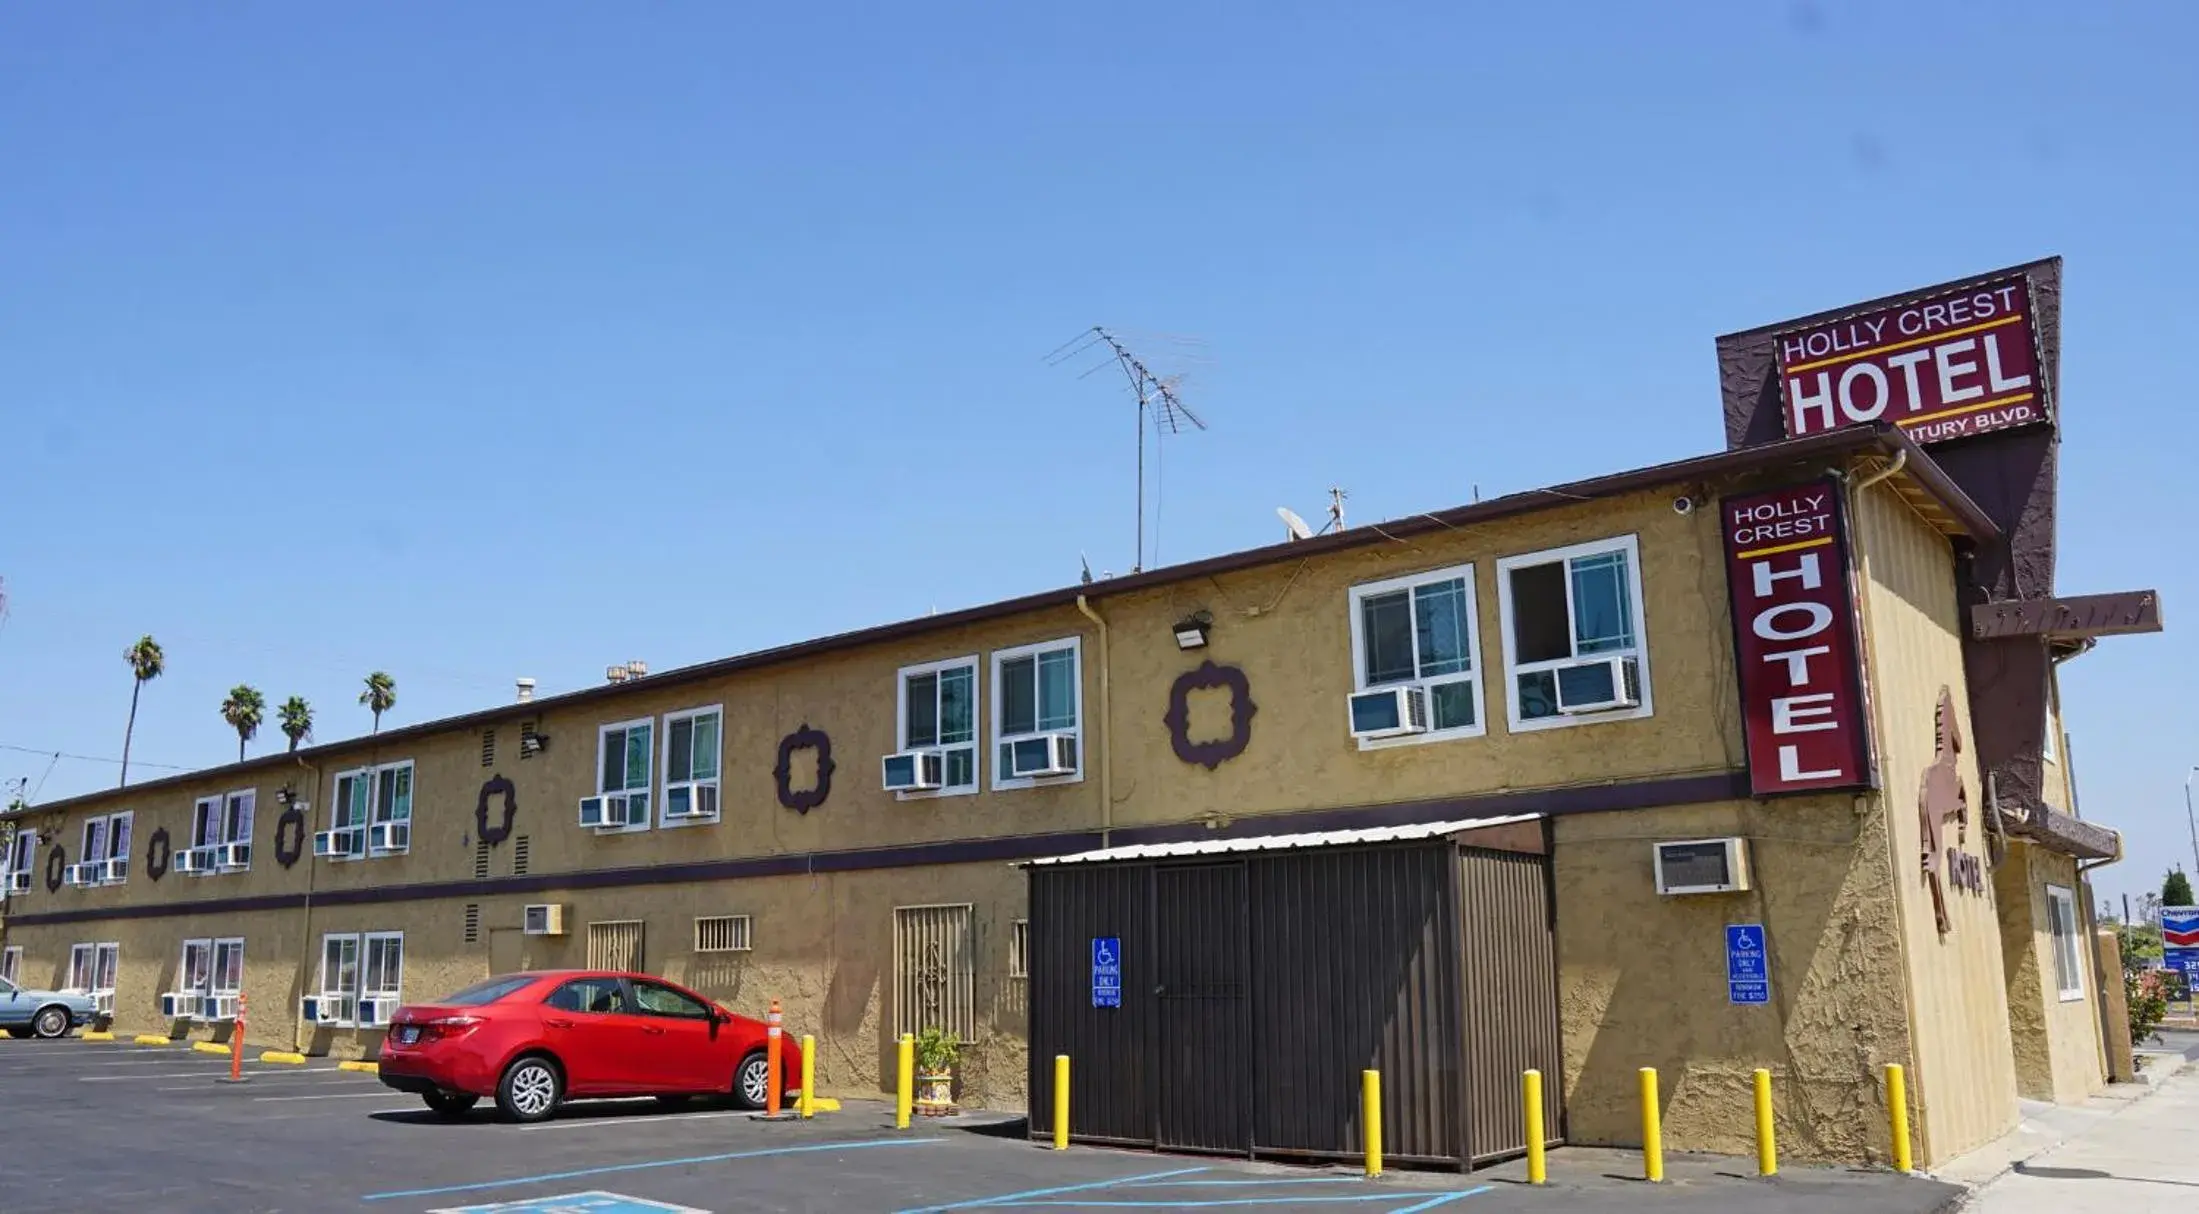 Property Building in Holly Crest Hotel - Los Angeles, LAX Airport